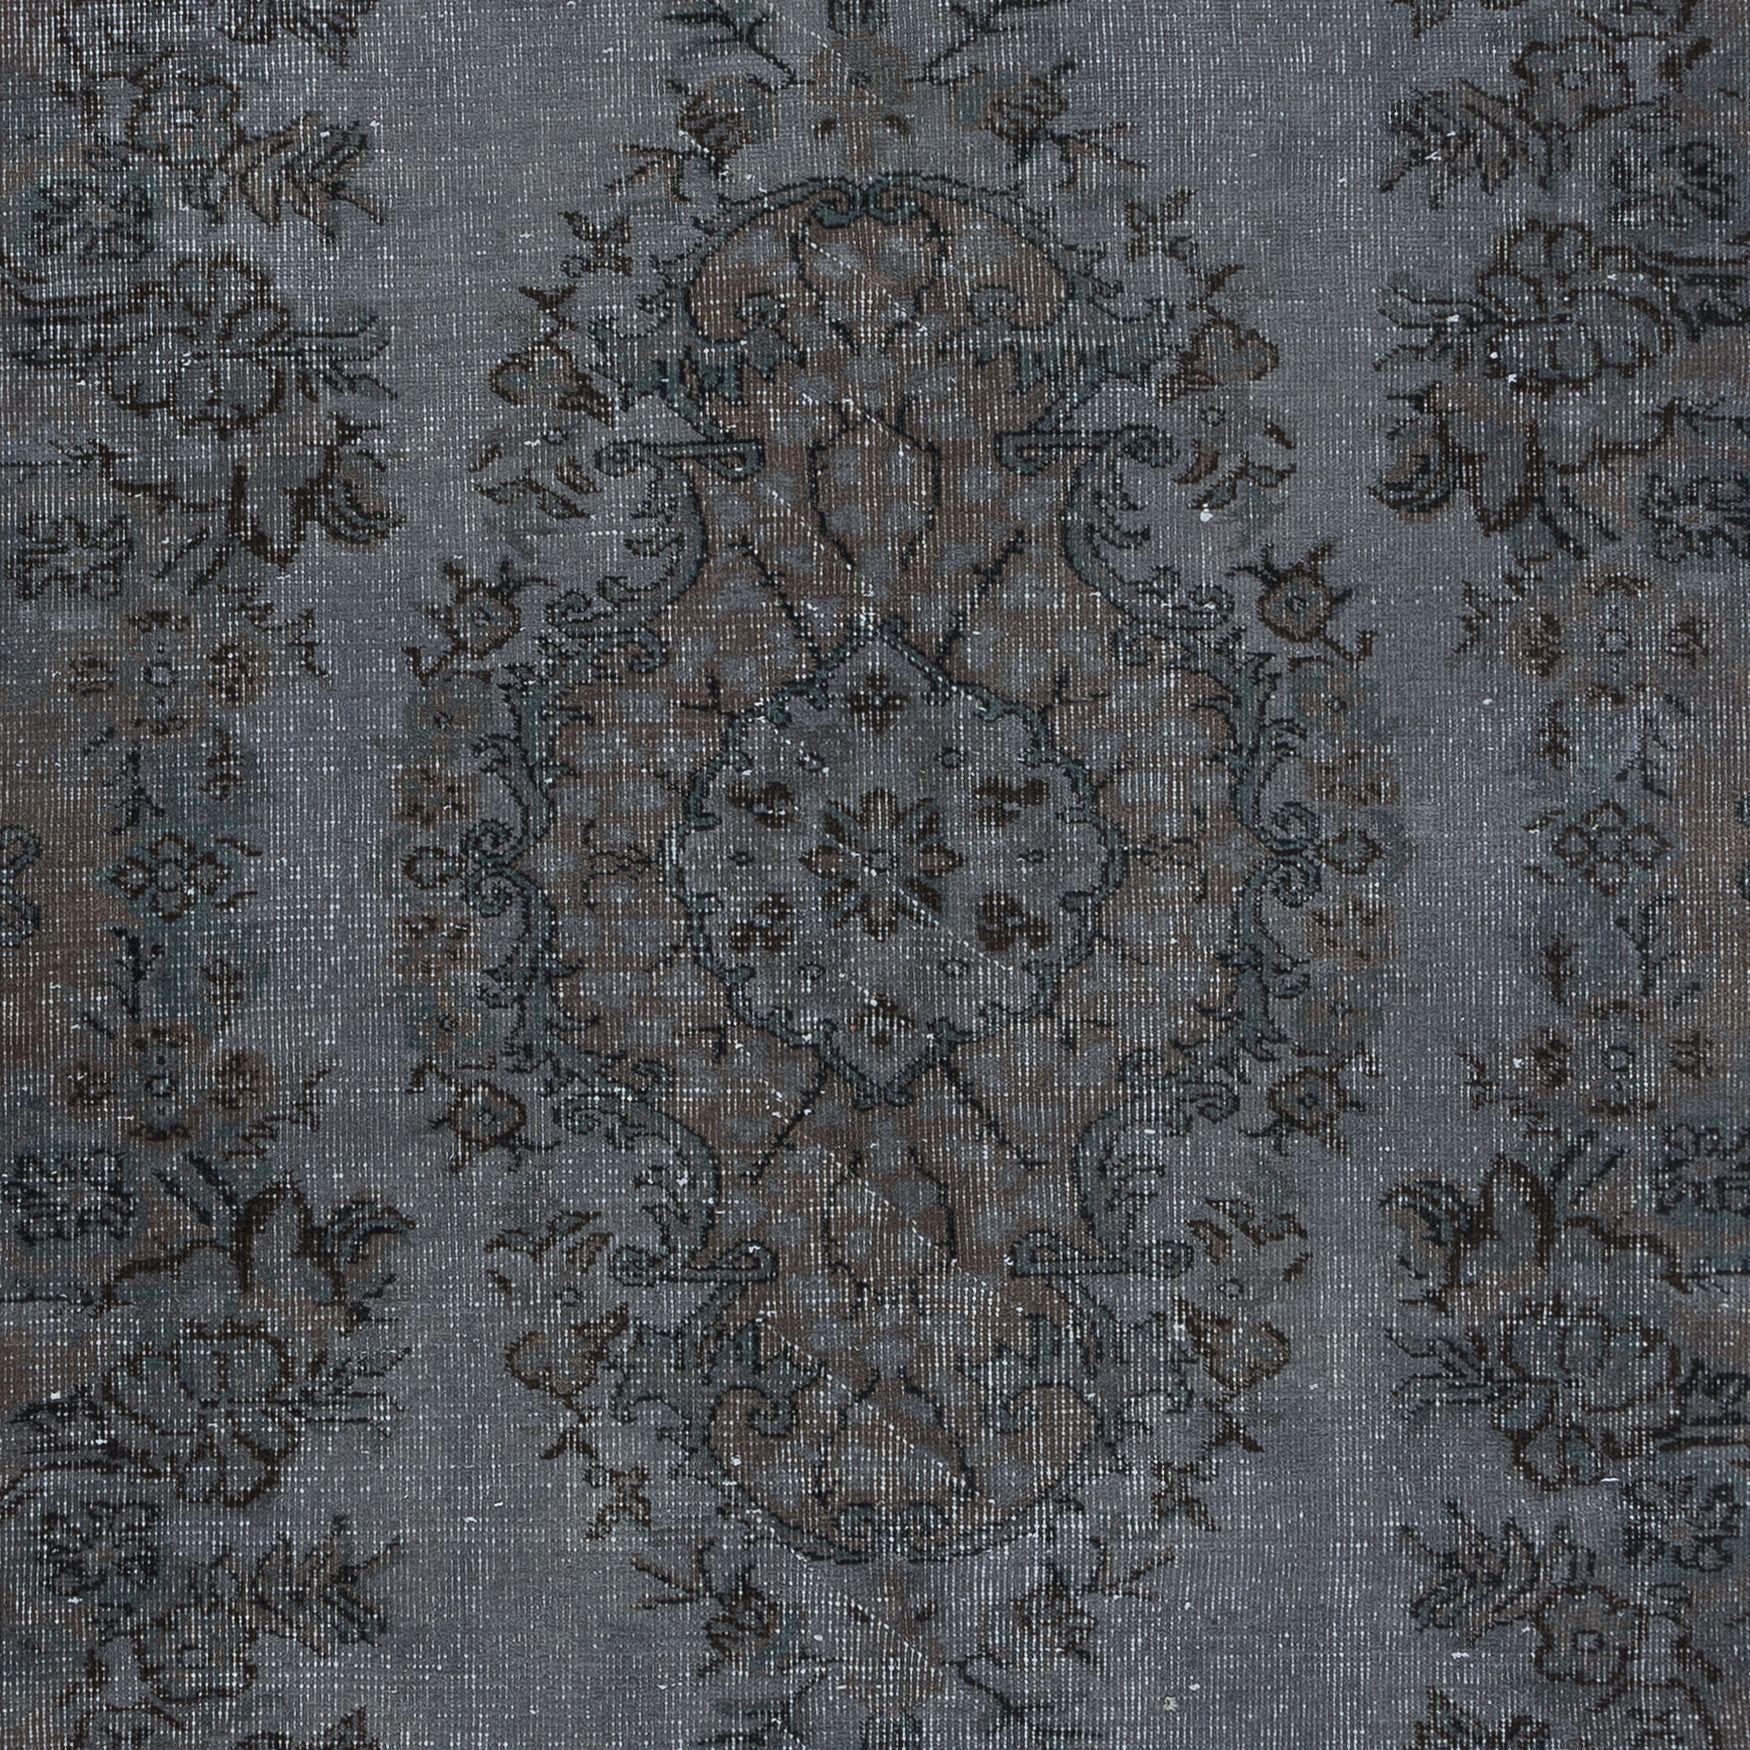 Hand-Woven 5.6x8.8 Ft Contemporary Handmade Gray Indoor Outdoor Rug with Medallion Design For Sale